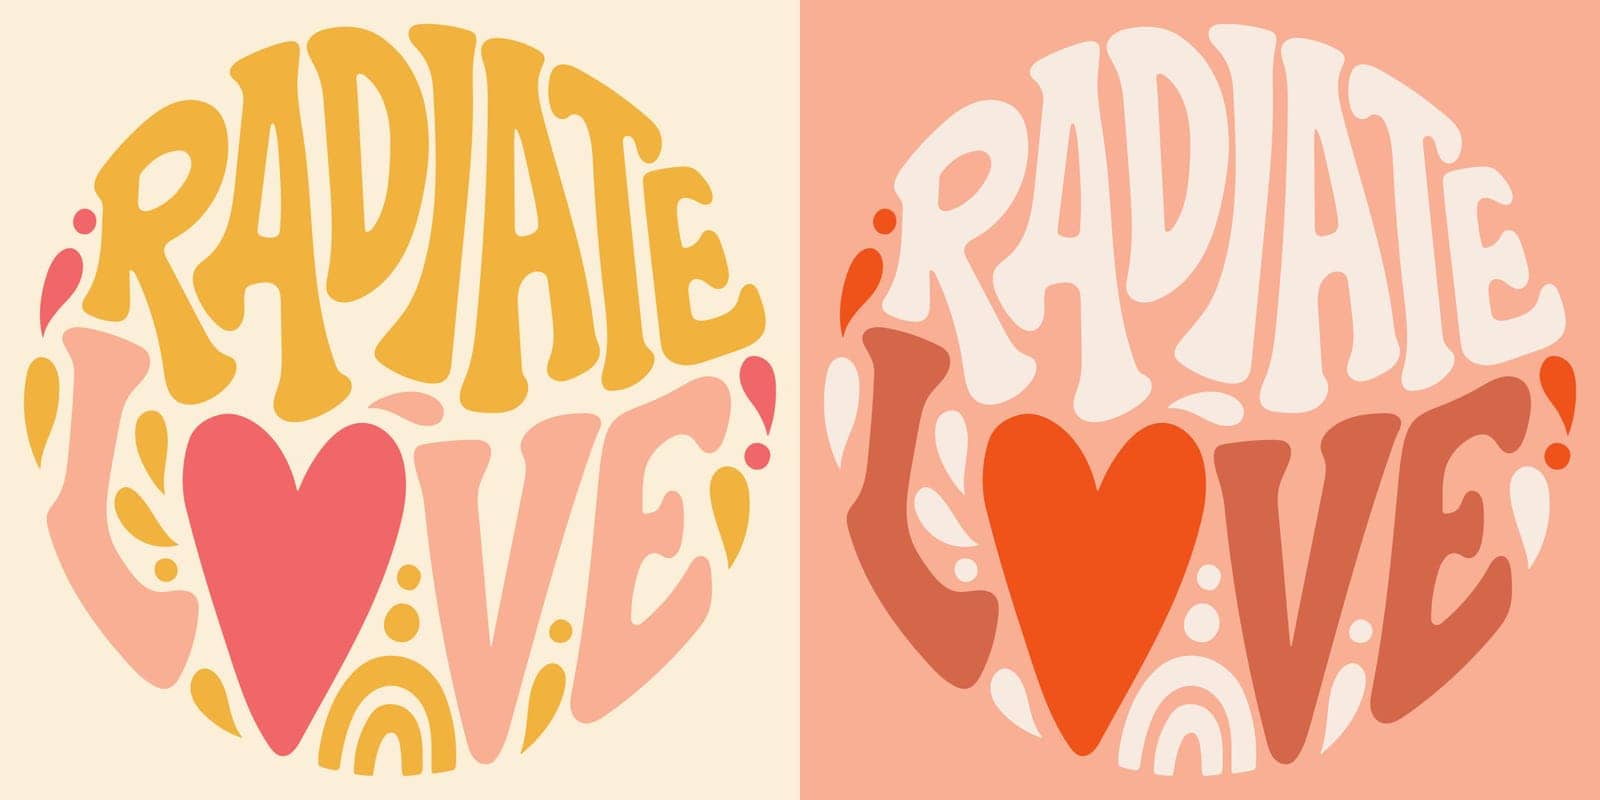 Groovy lettering Radiate Love. Retro slogan in round shape. Trendy groovy print design for posters, cards, tshirts in style 60s, 70s. Vector illustration.